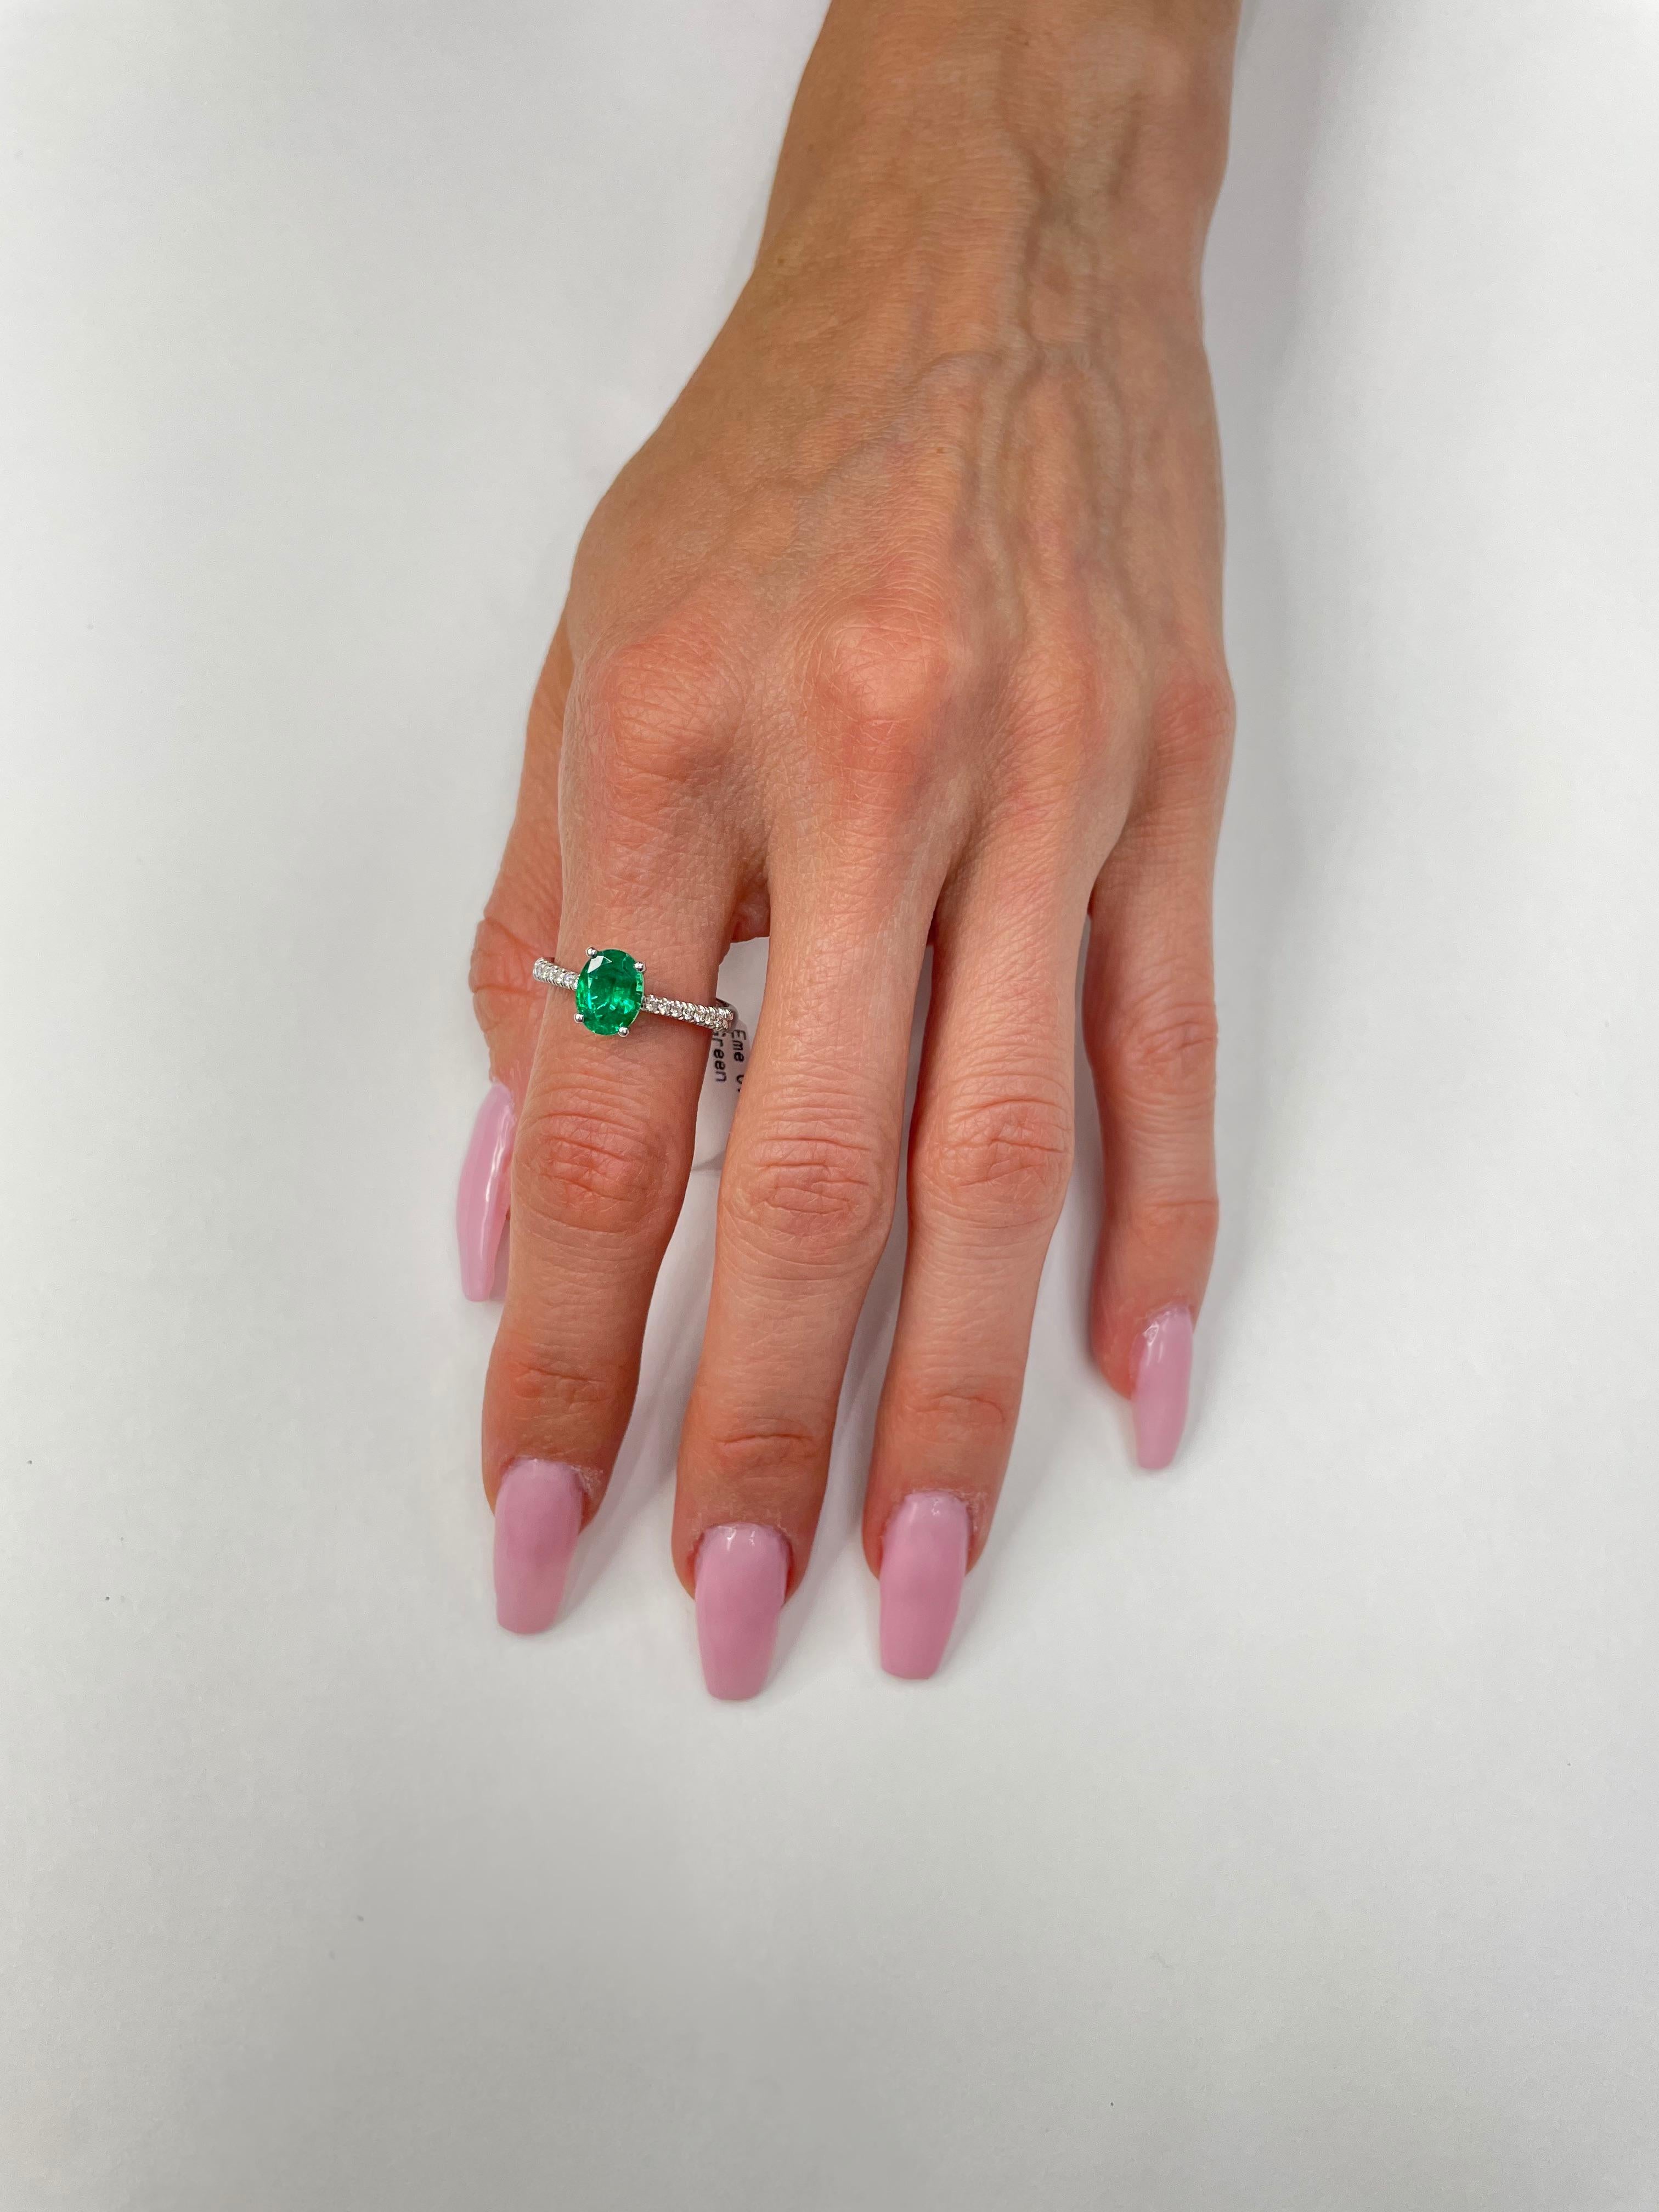 This sweet 1.28ct Oval Cut Green Emerald and diamond is set in 18K white gold + 0.15cttw Diamonds